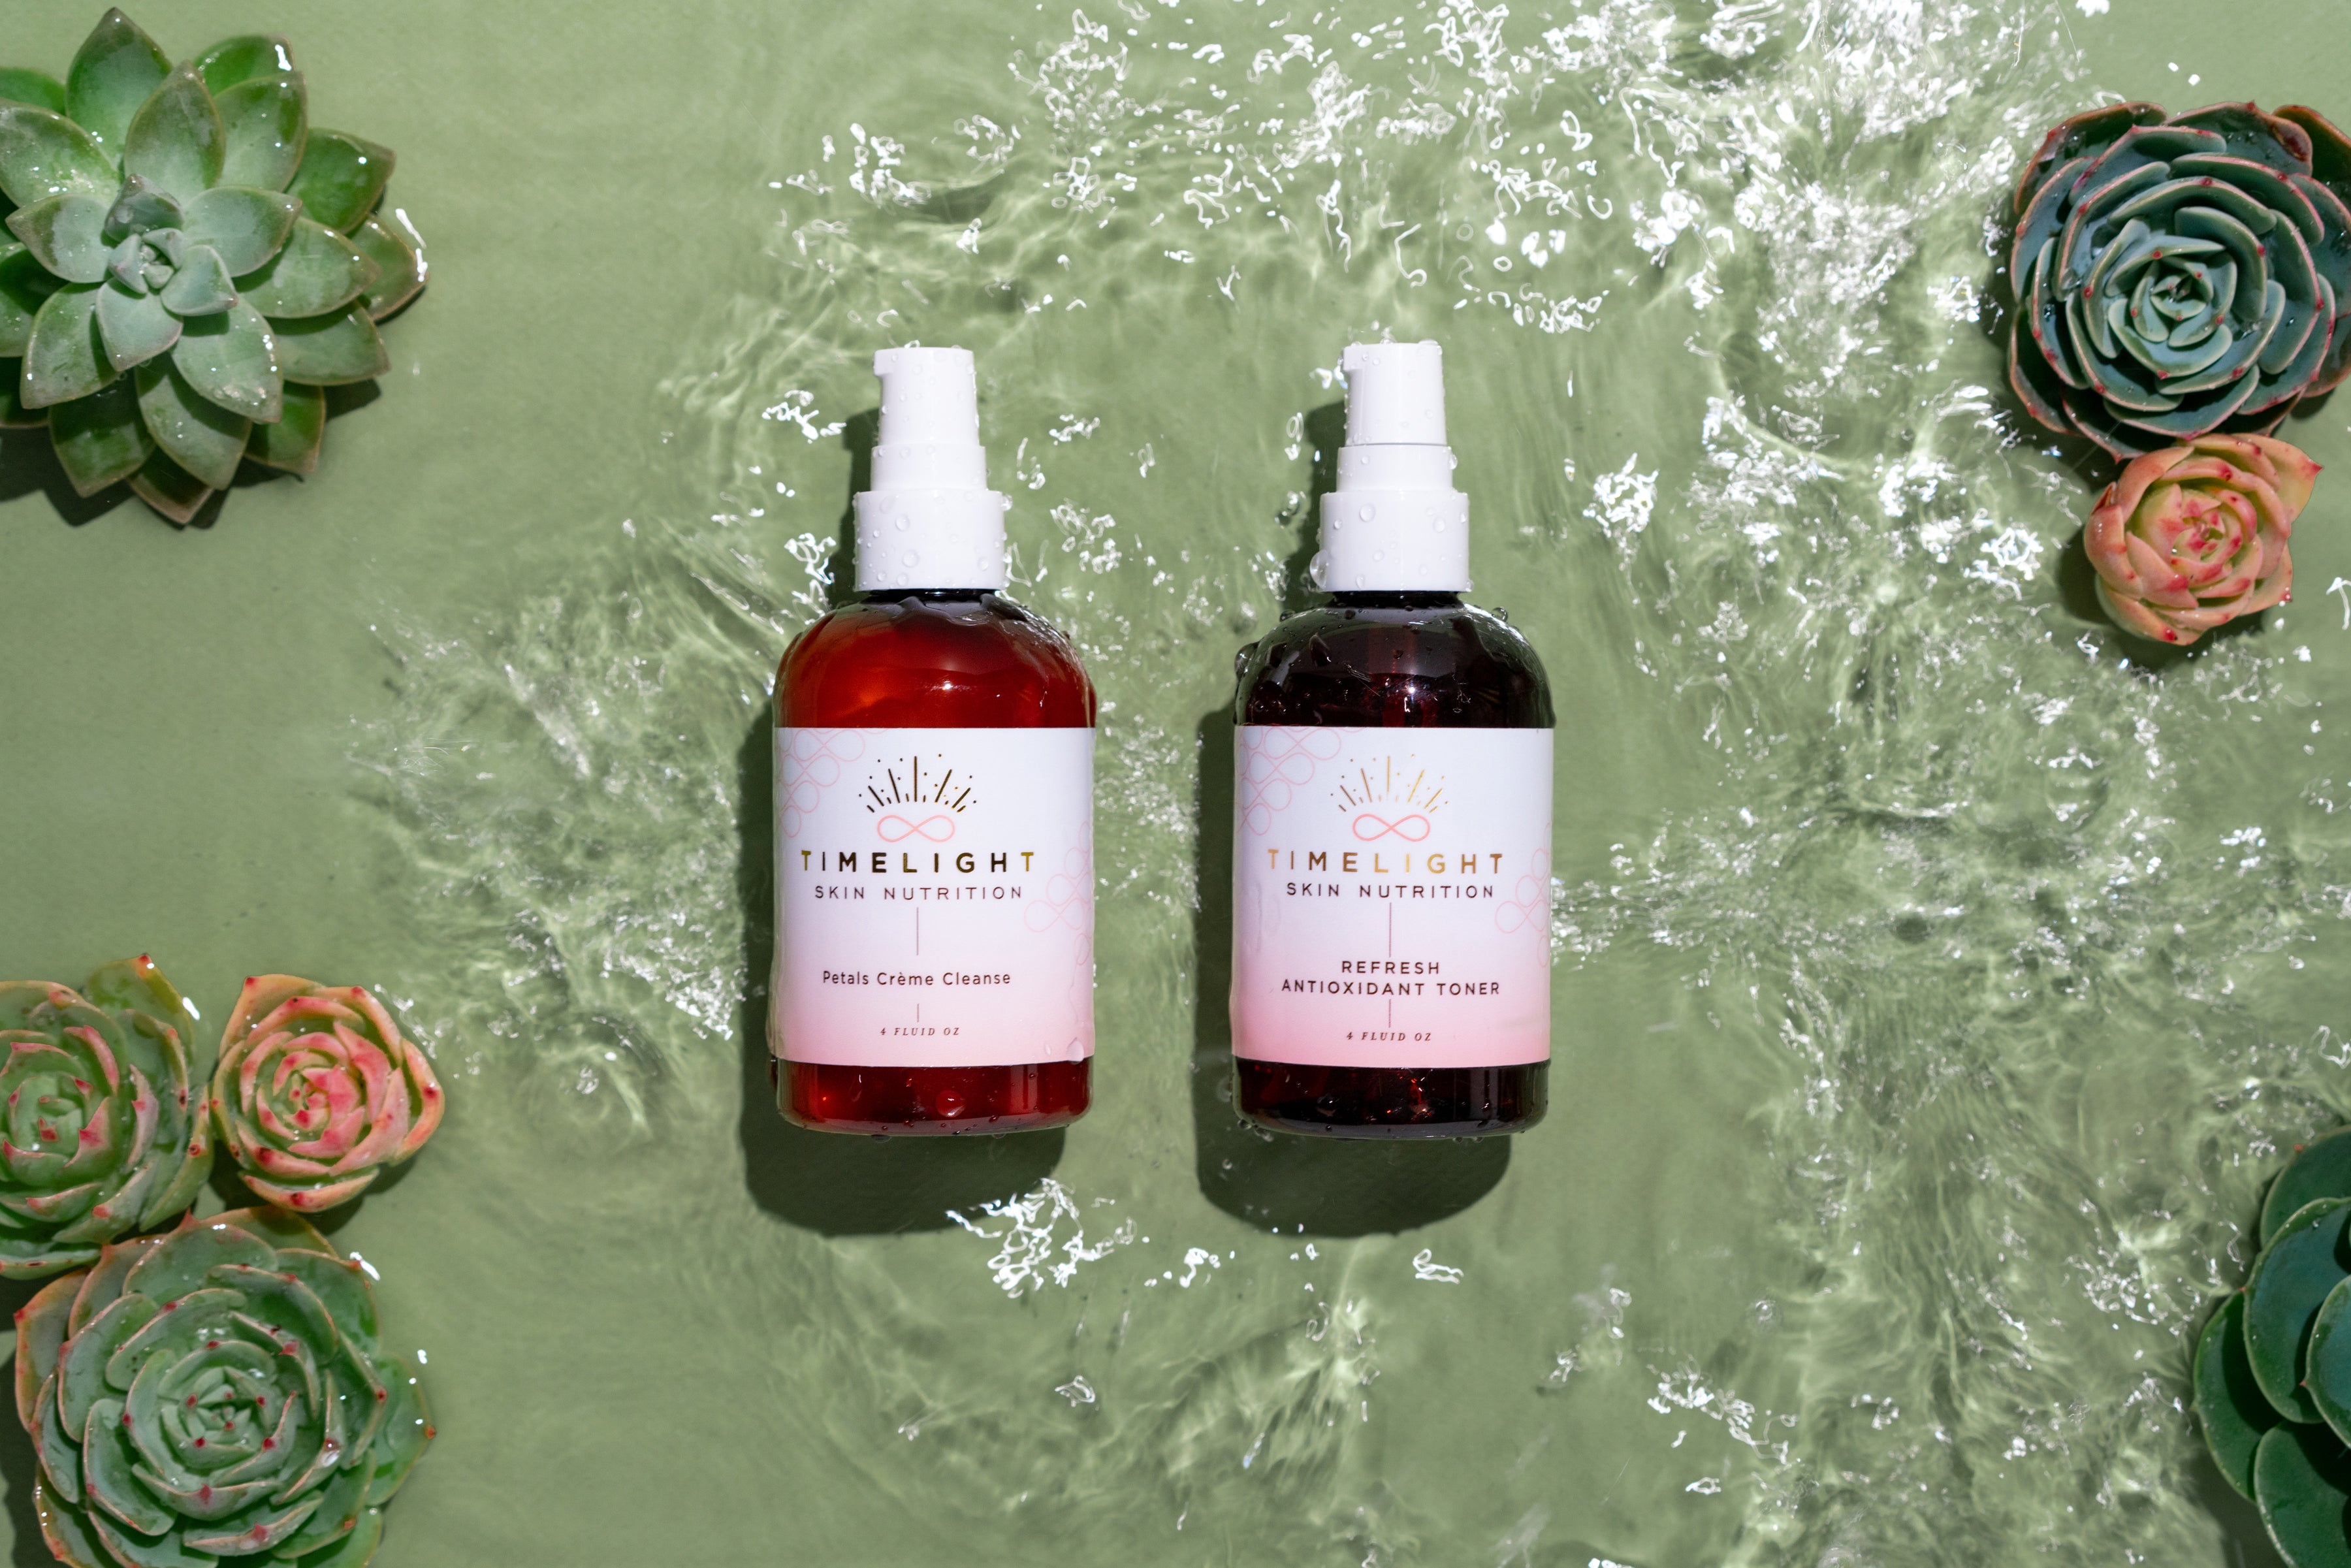 "Skin Nutrition Duo: Two elegant bottles of rejuvenating skincare solutions surrounded by lush succulents and droplets of water, set against a refreshing green background."